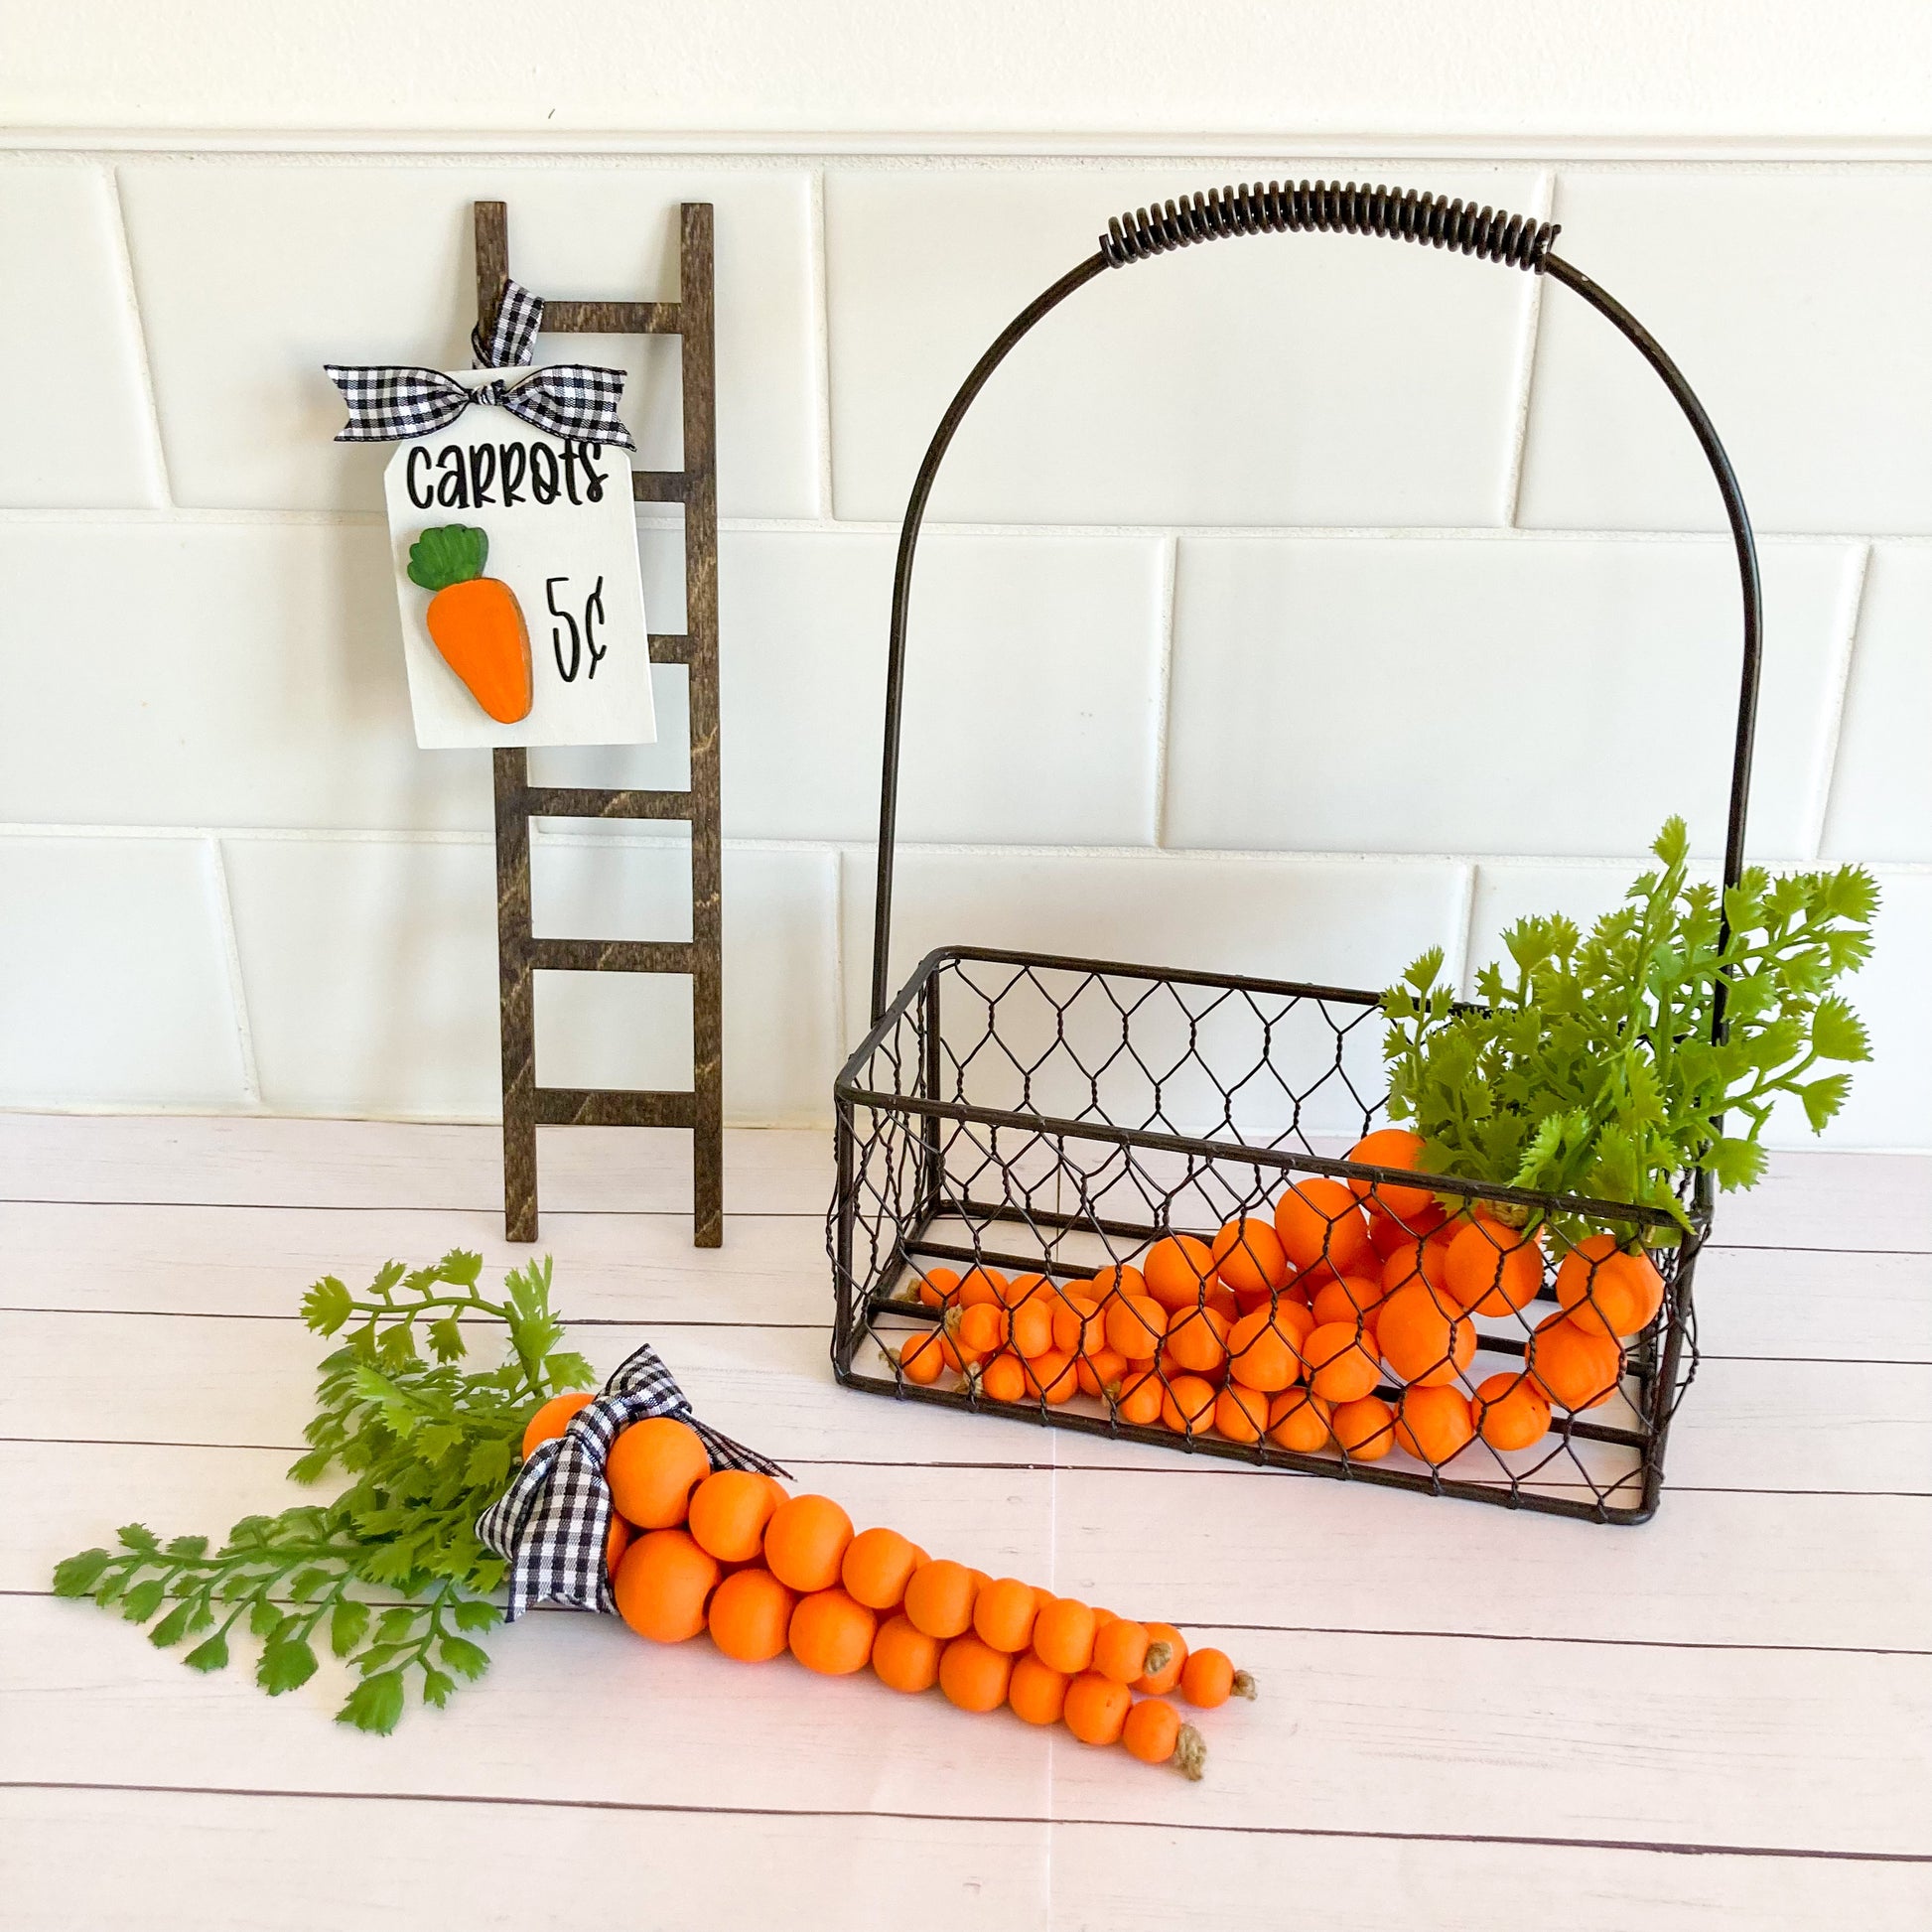 Handmade 3 orange carrot decor bundle each 8" long including 5" of wood beading with 3" faux greenery tied together with a buffalo checkered ribbon